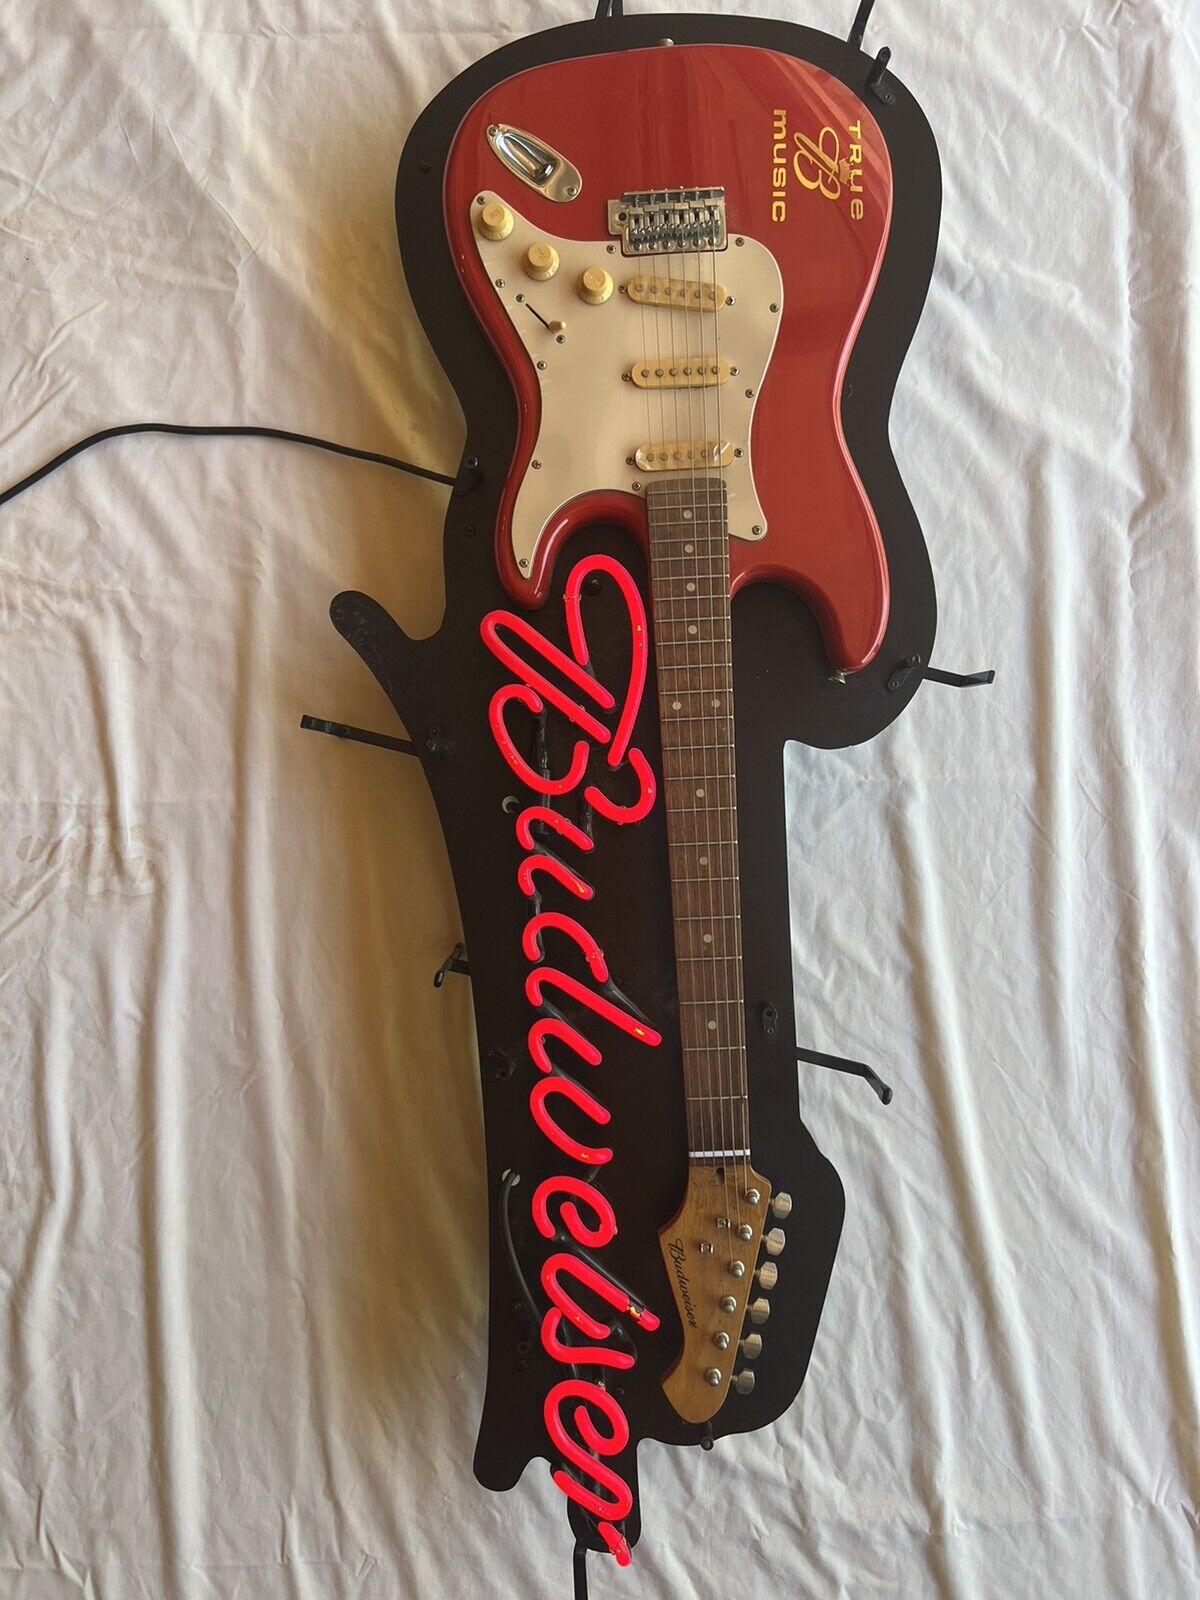 BUDWEISER NEON SIGN WITH GUITAR - RARE